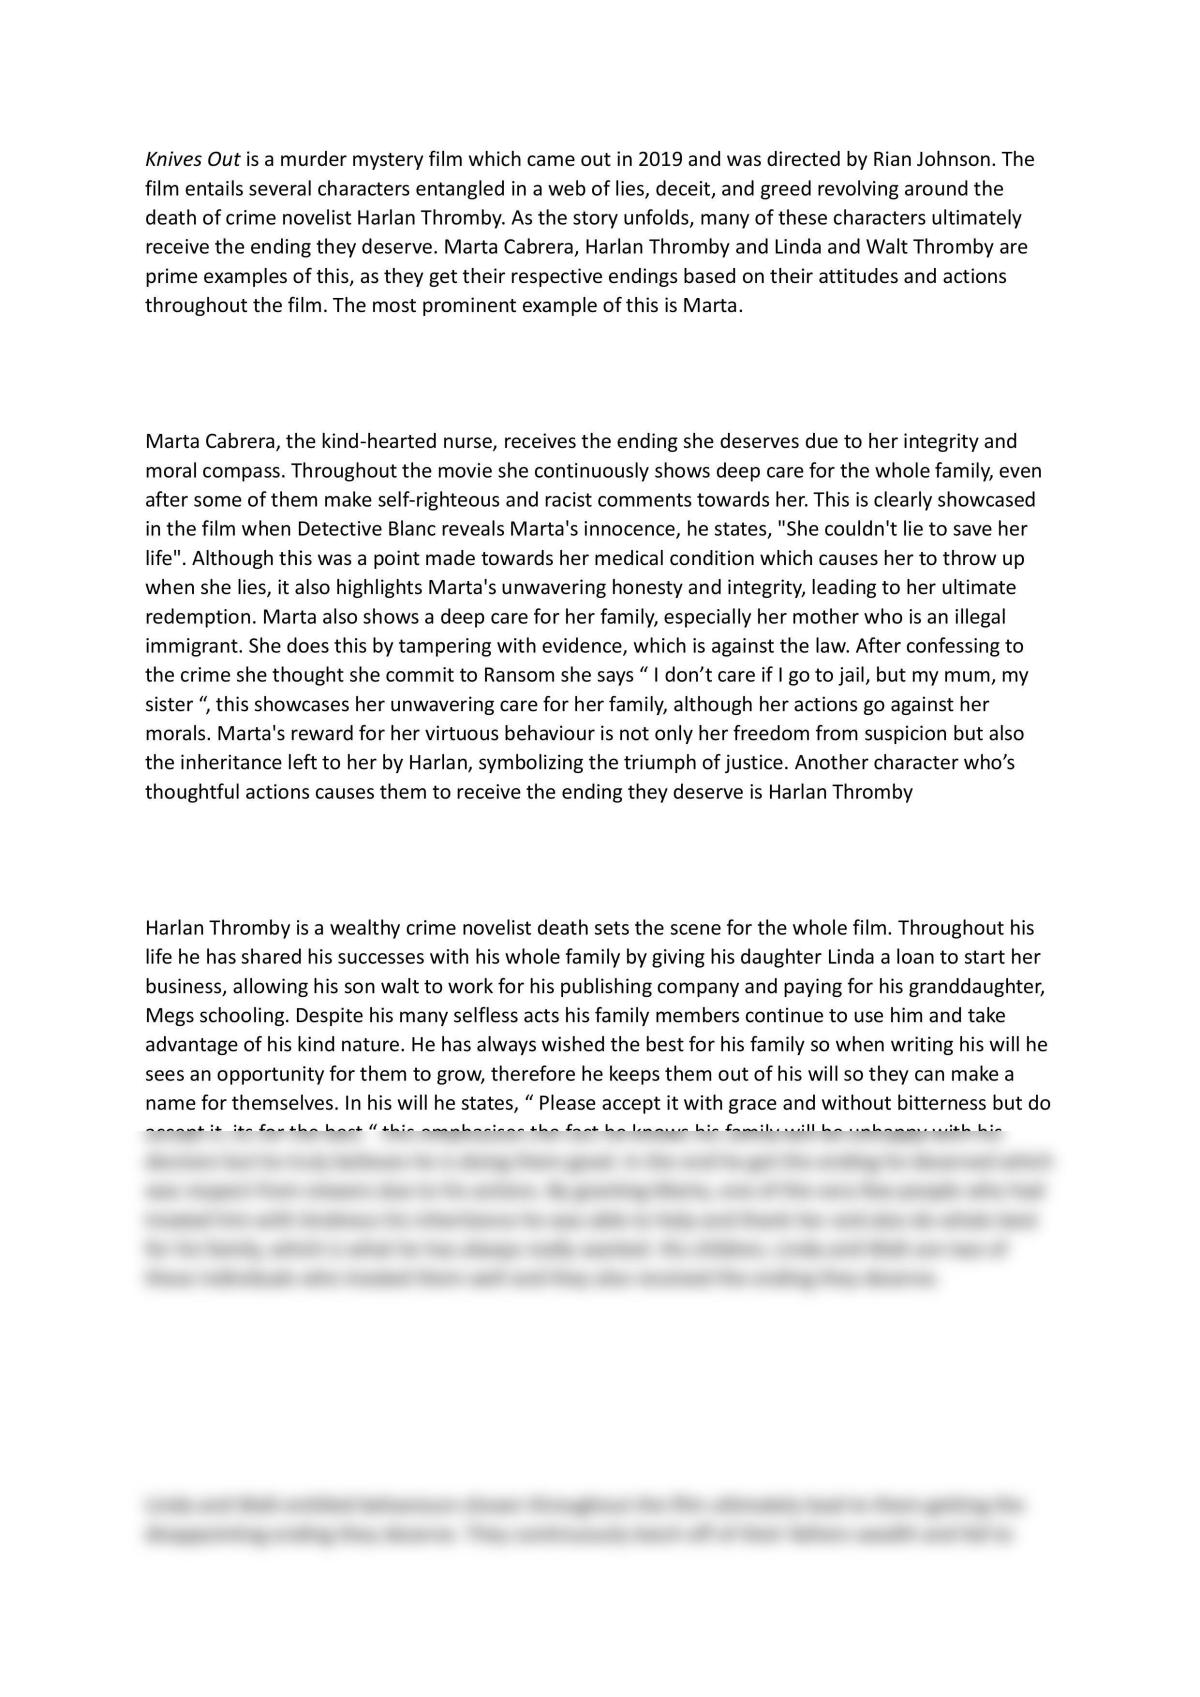 knives out review essay